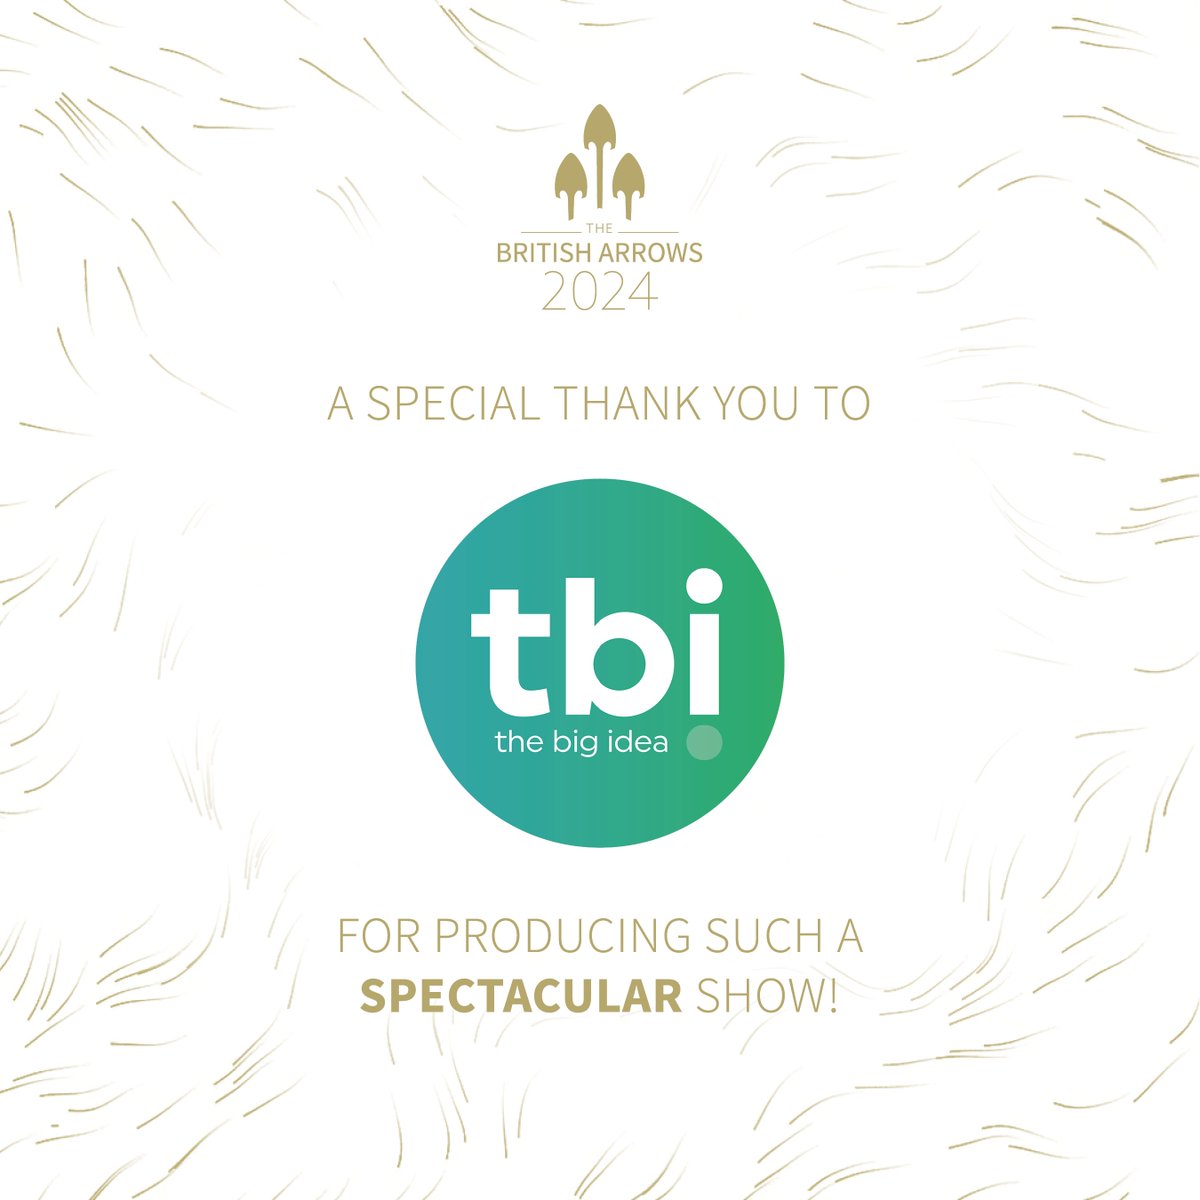 A special thank you to TBI Media For producing such a spectacular show! #BA23 #BA23 #BritishArrows #advertising #award #celebration